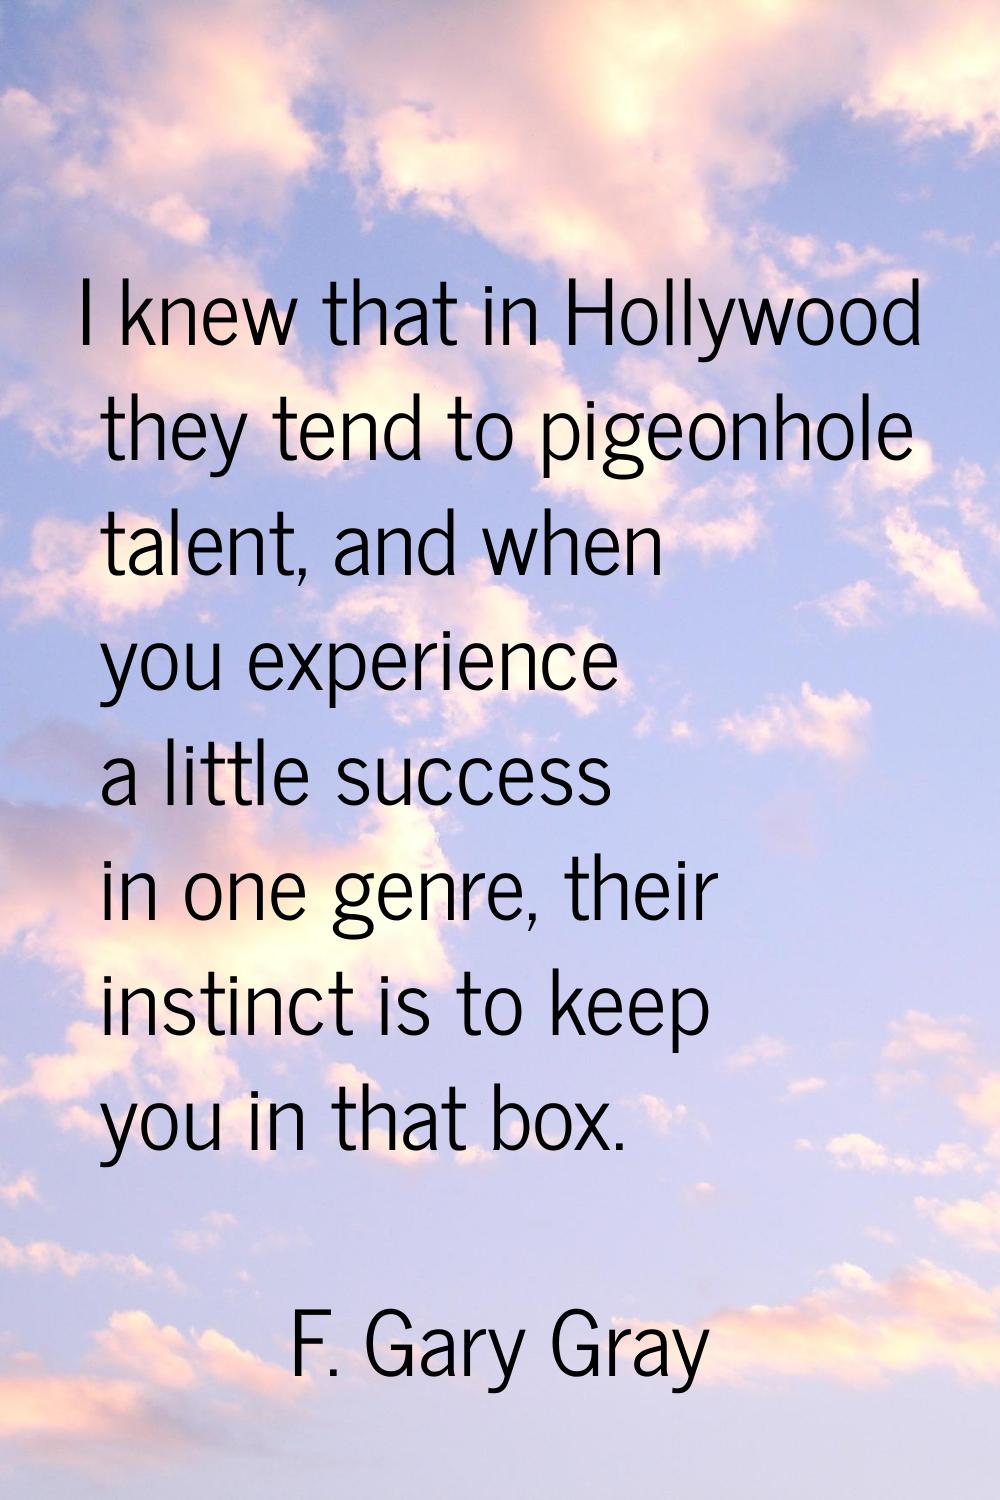 I knew that in Hollywood they tend to pigeonhole talent, and when you experience a little success i